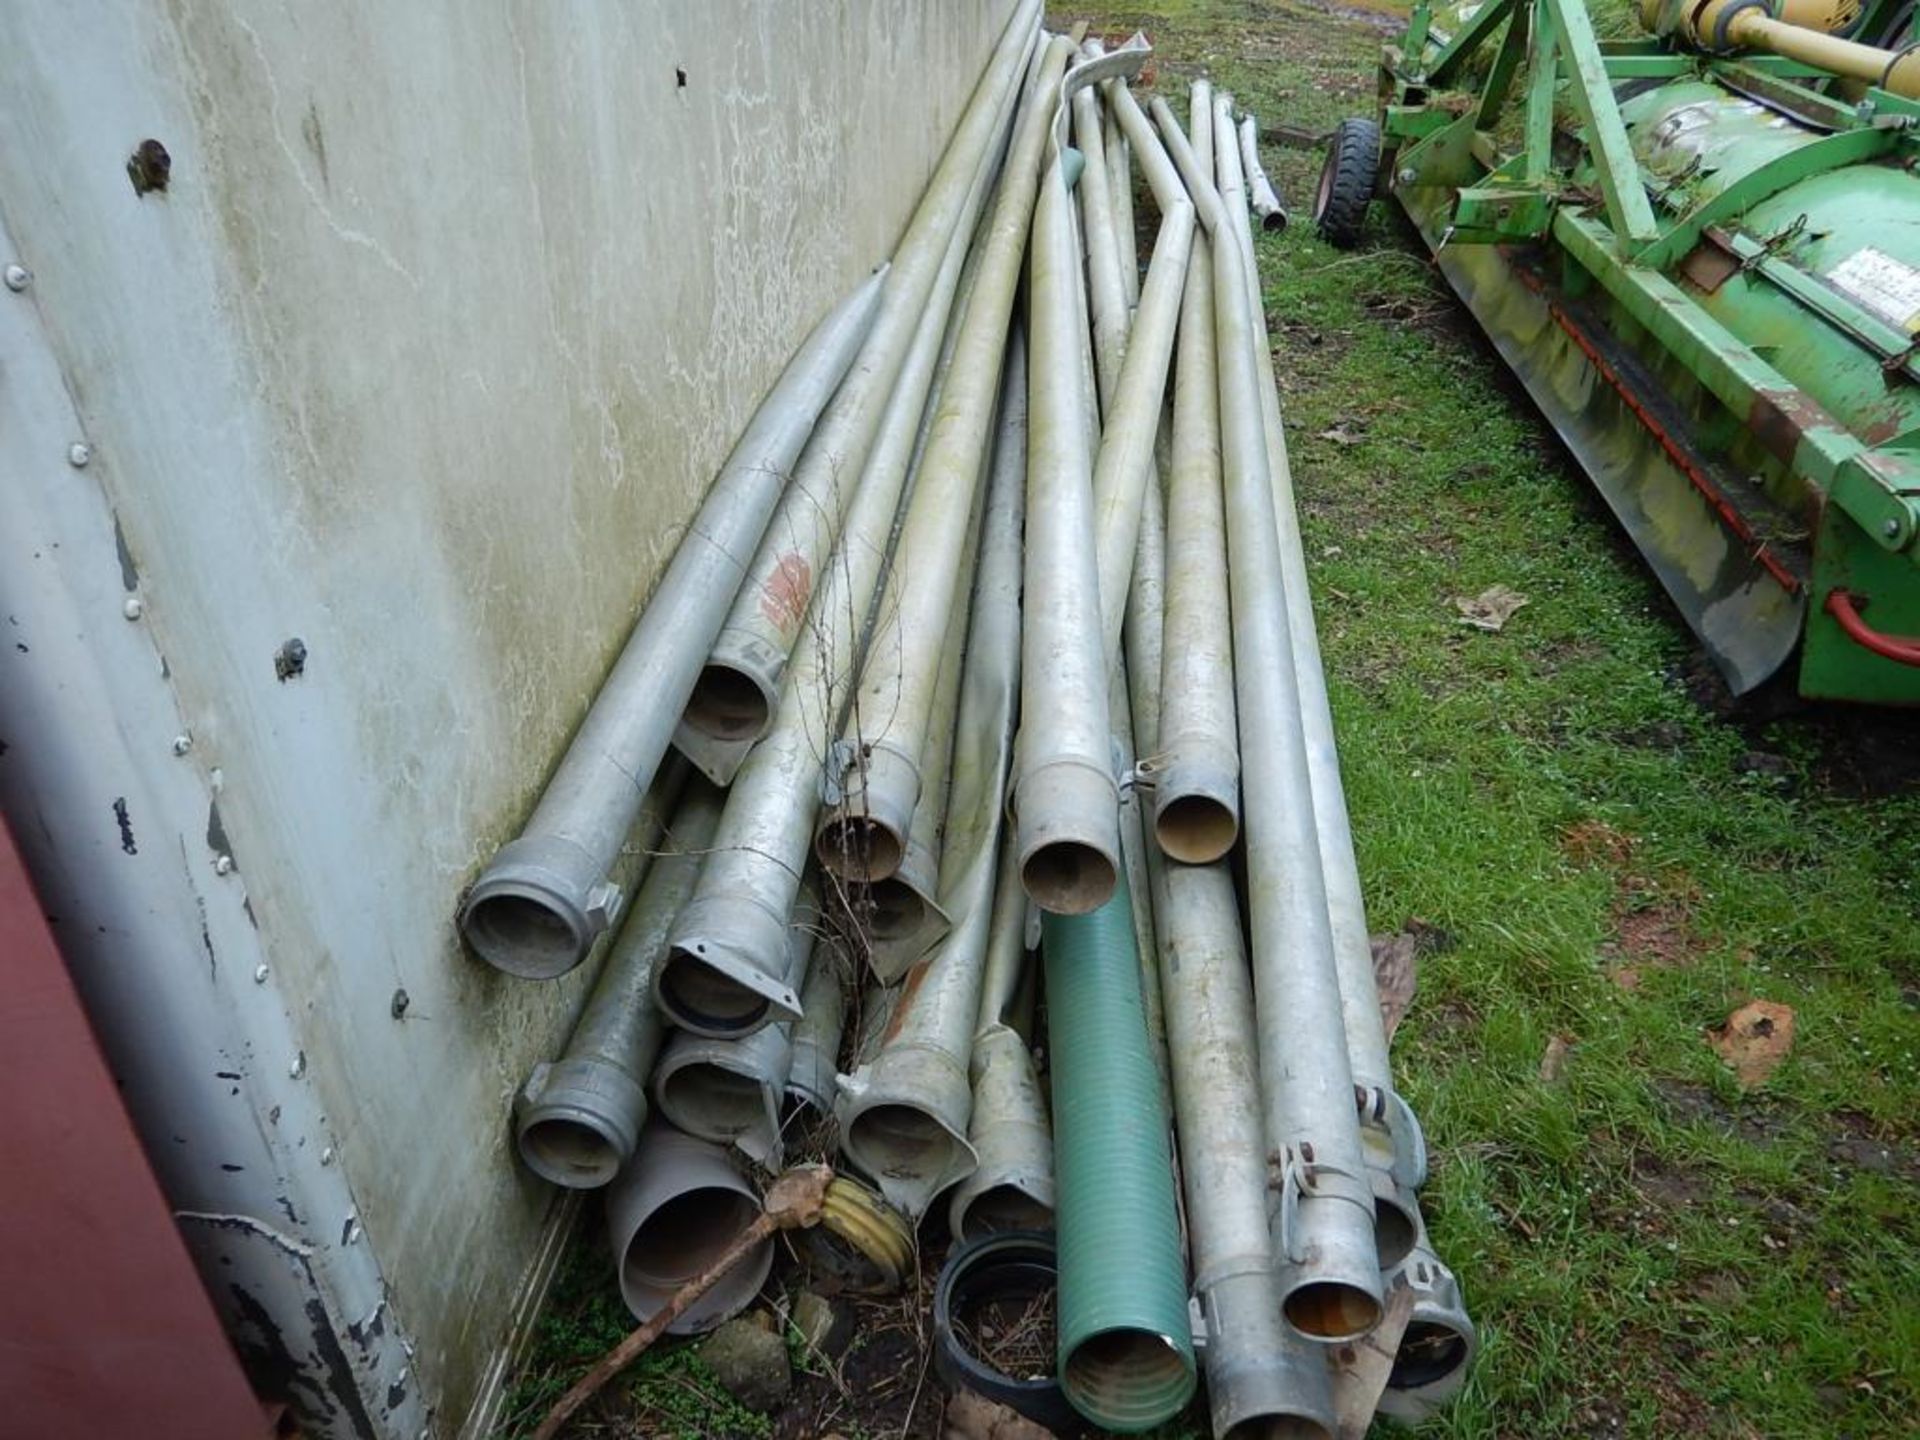 Qty 4&5inch irrigation pipes, damaged